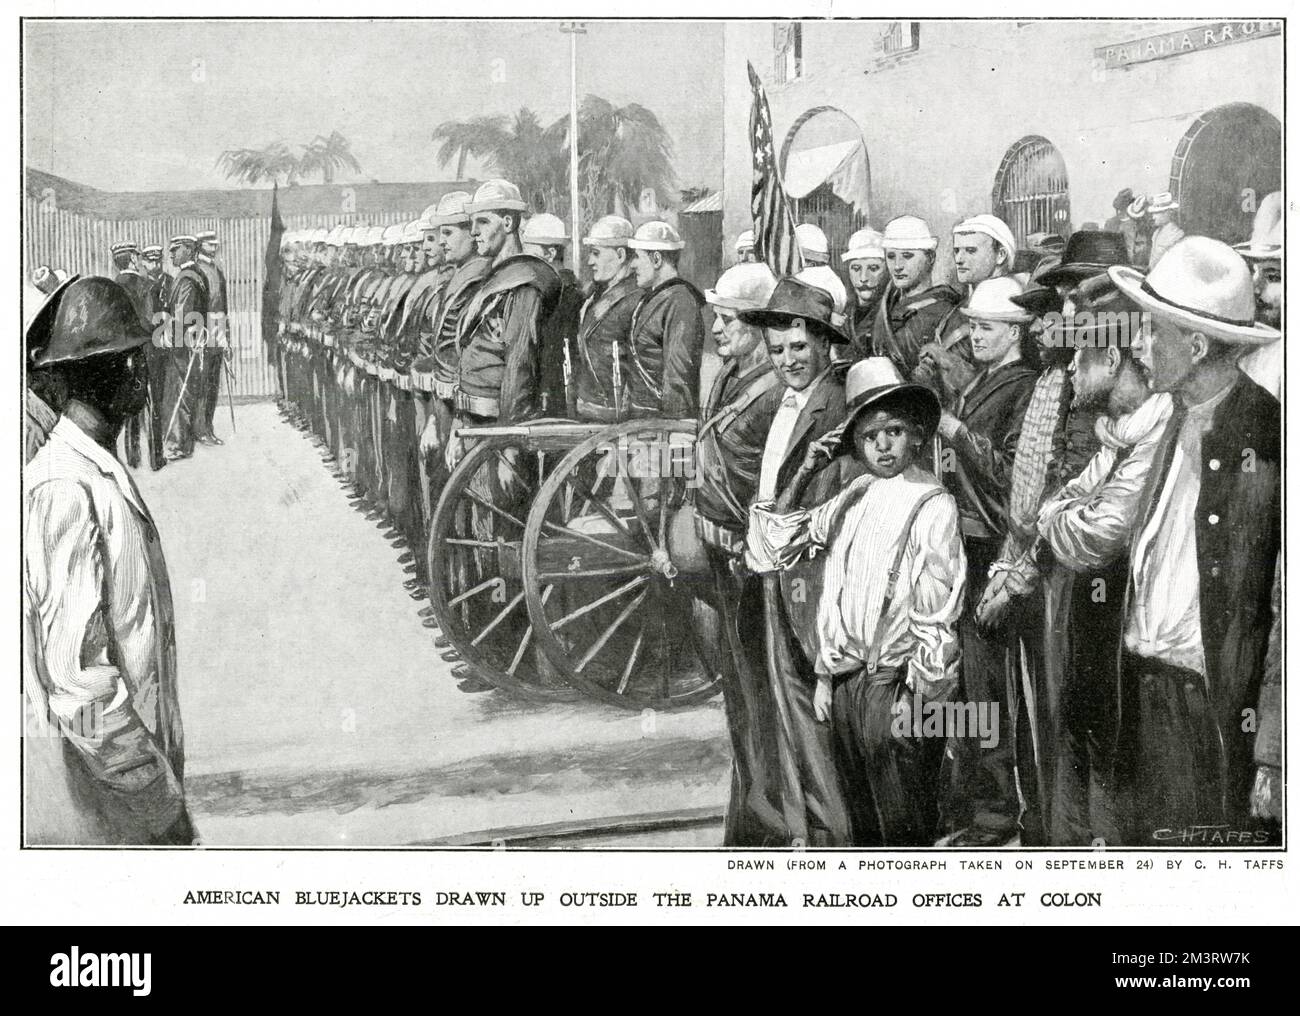 On 3rd November 1903, American forces prevented Colombian troops from travelling from Colon to suppress a rebellion occurring in Panama City by standing in front of the train station.This was to ensure their interests in the Panama Canal, US president Roosevelt and French financiers conspired to support the separation of Panama from Columbia in order to secure the construction and access to the canal.     Date: 1903 Stock Photo